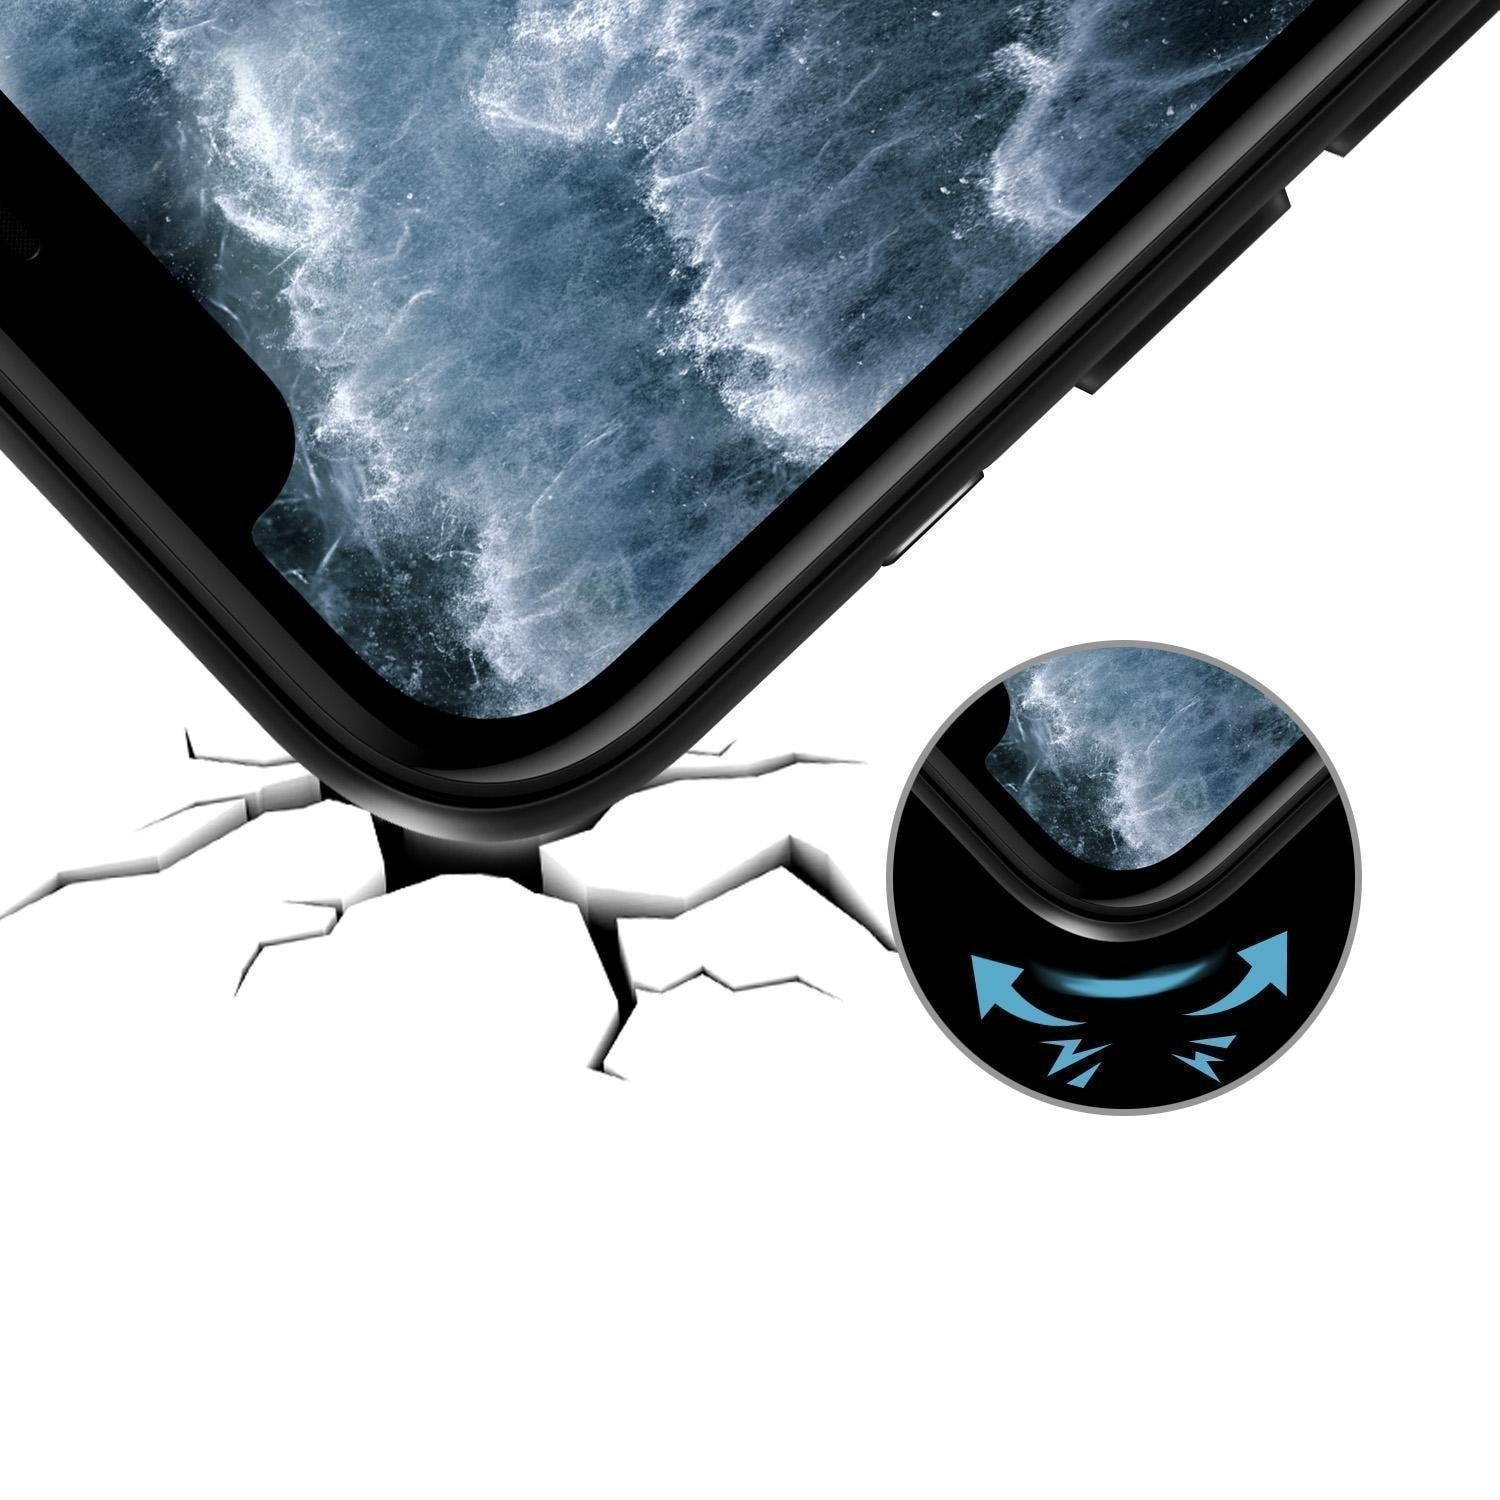 DEAL 2 for 1 cool case clown from stephen king's ''it'' scary iphone (1 av 3)